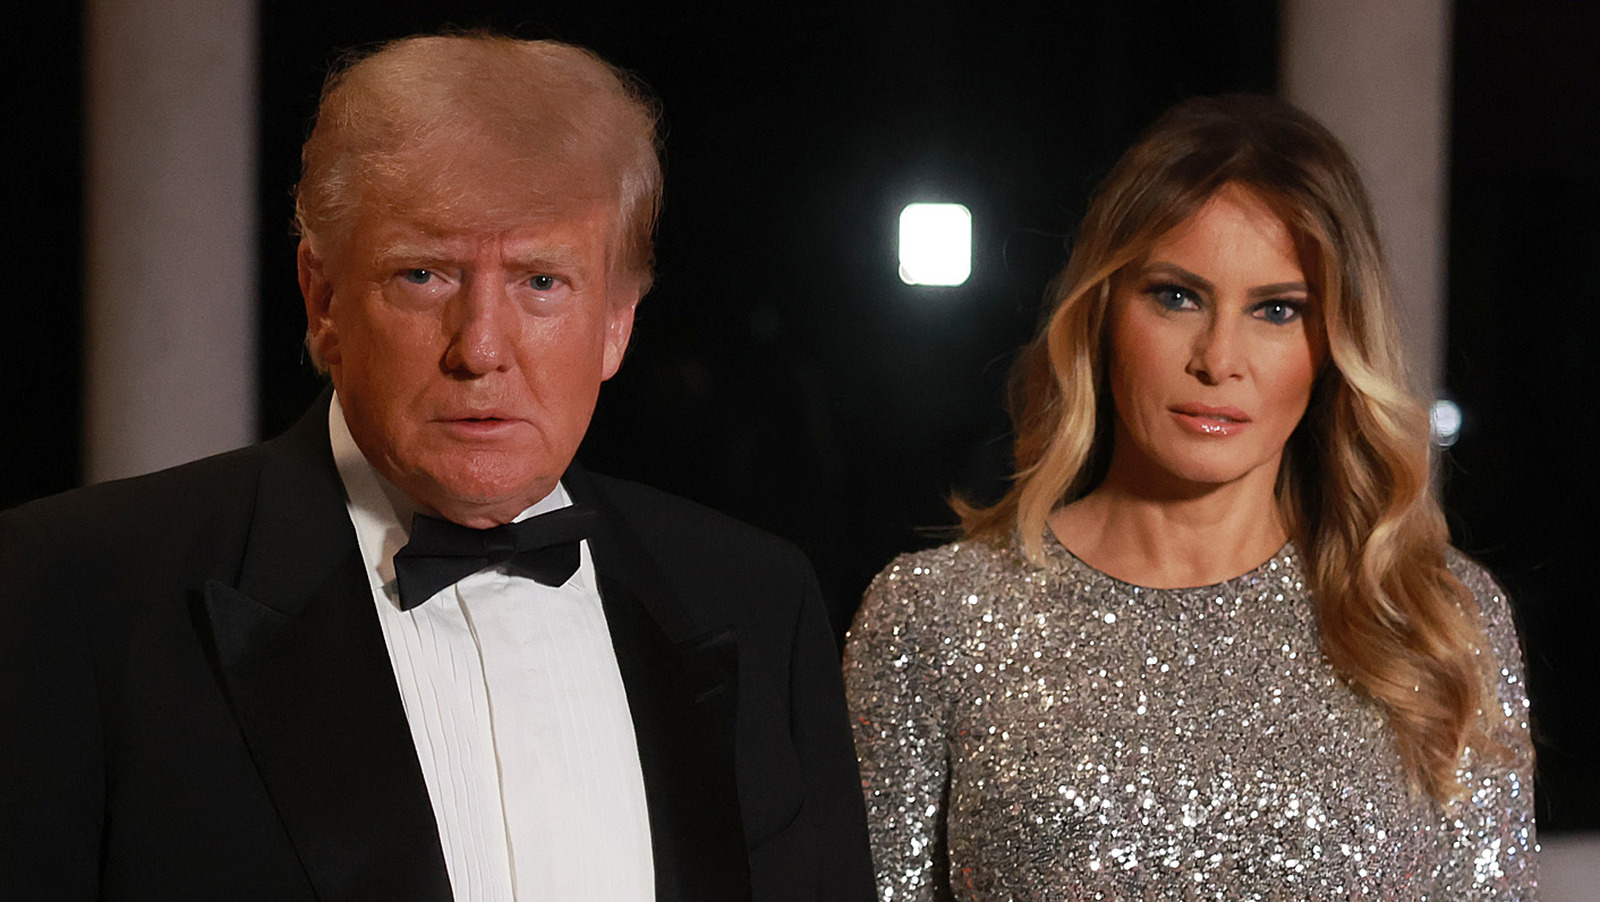 Signs Donald Trump And Melania’s Marriage Might Be On The Rocks